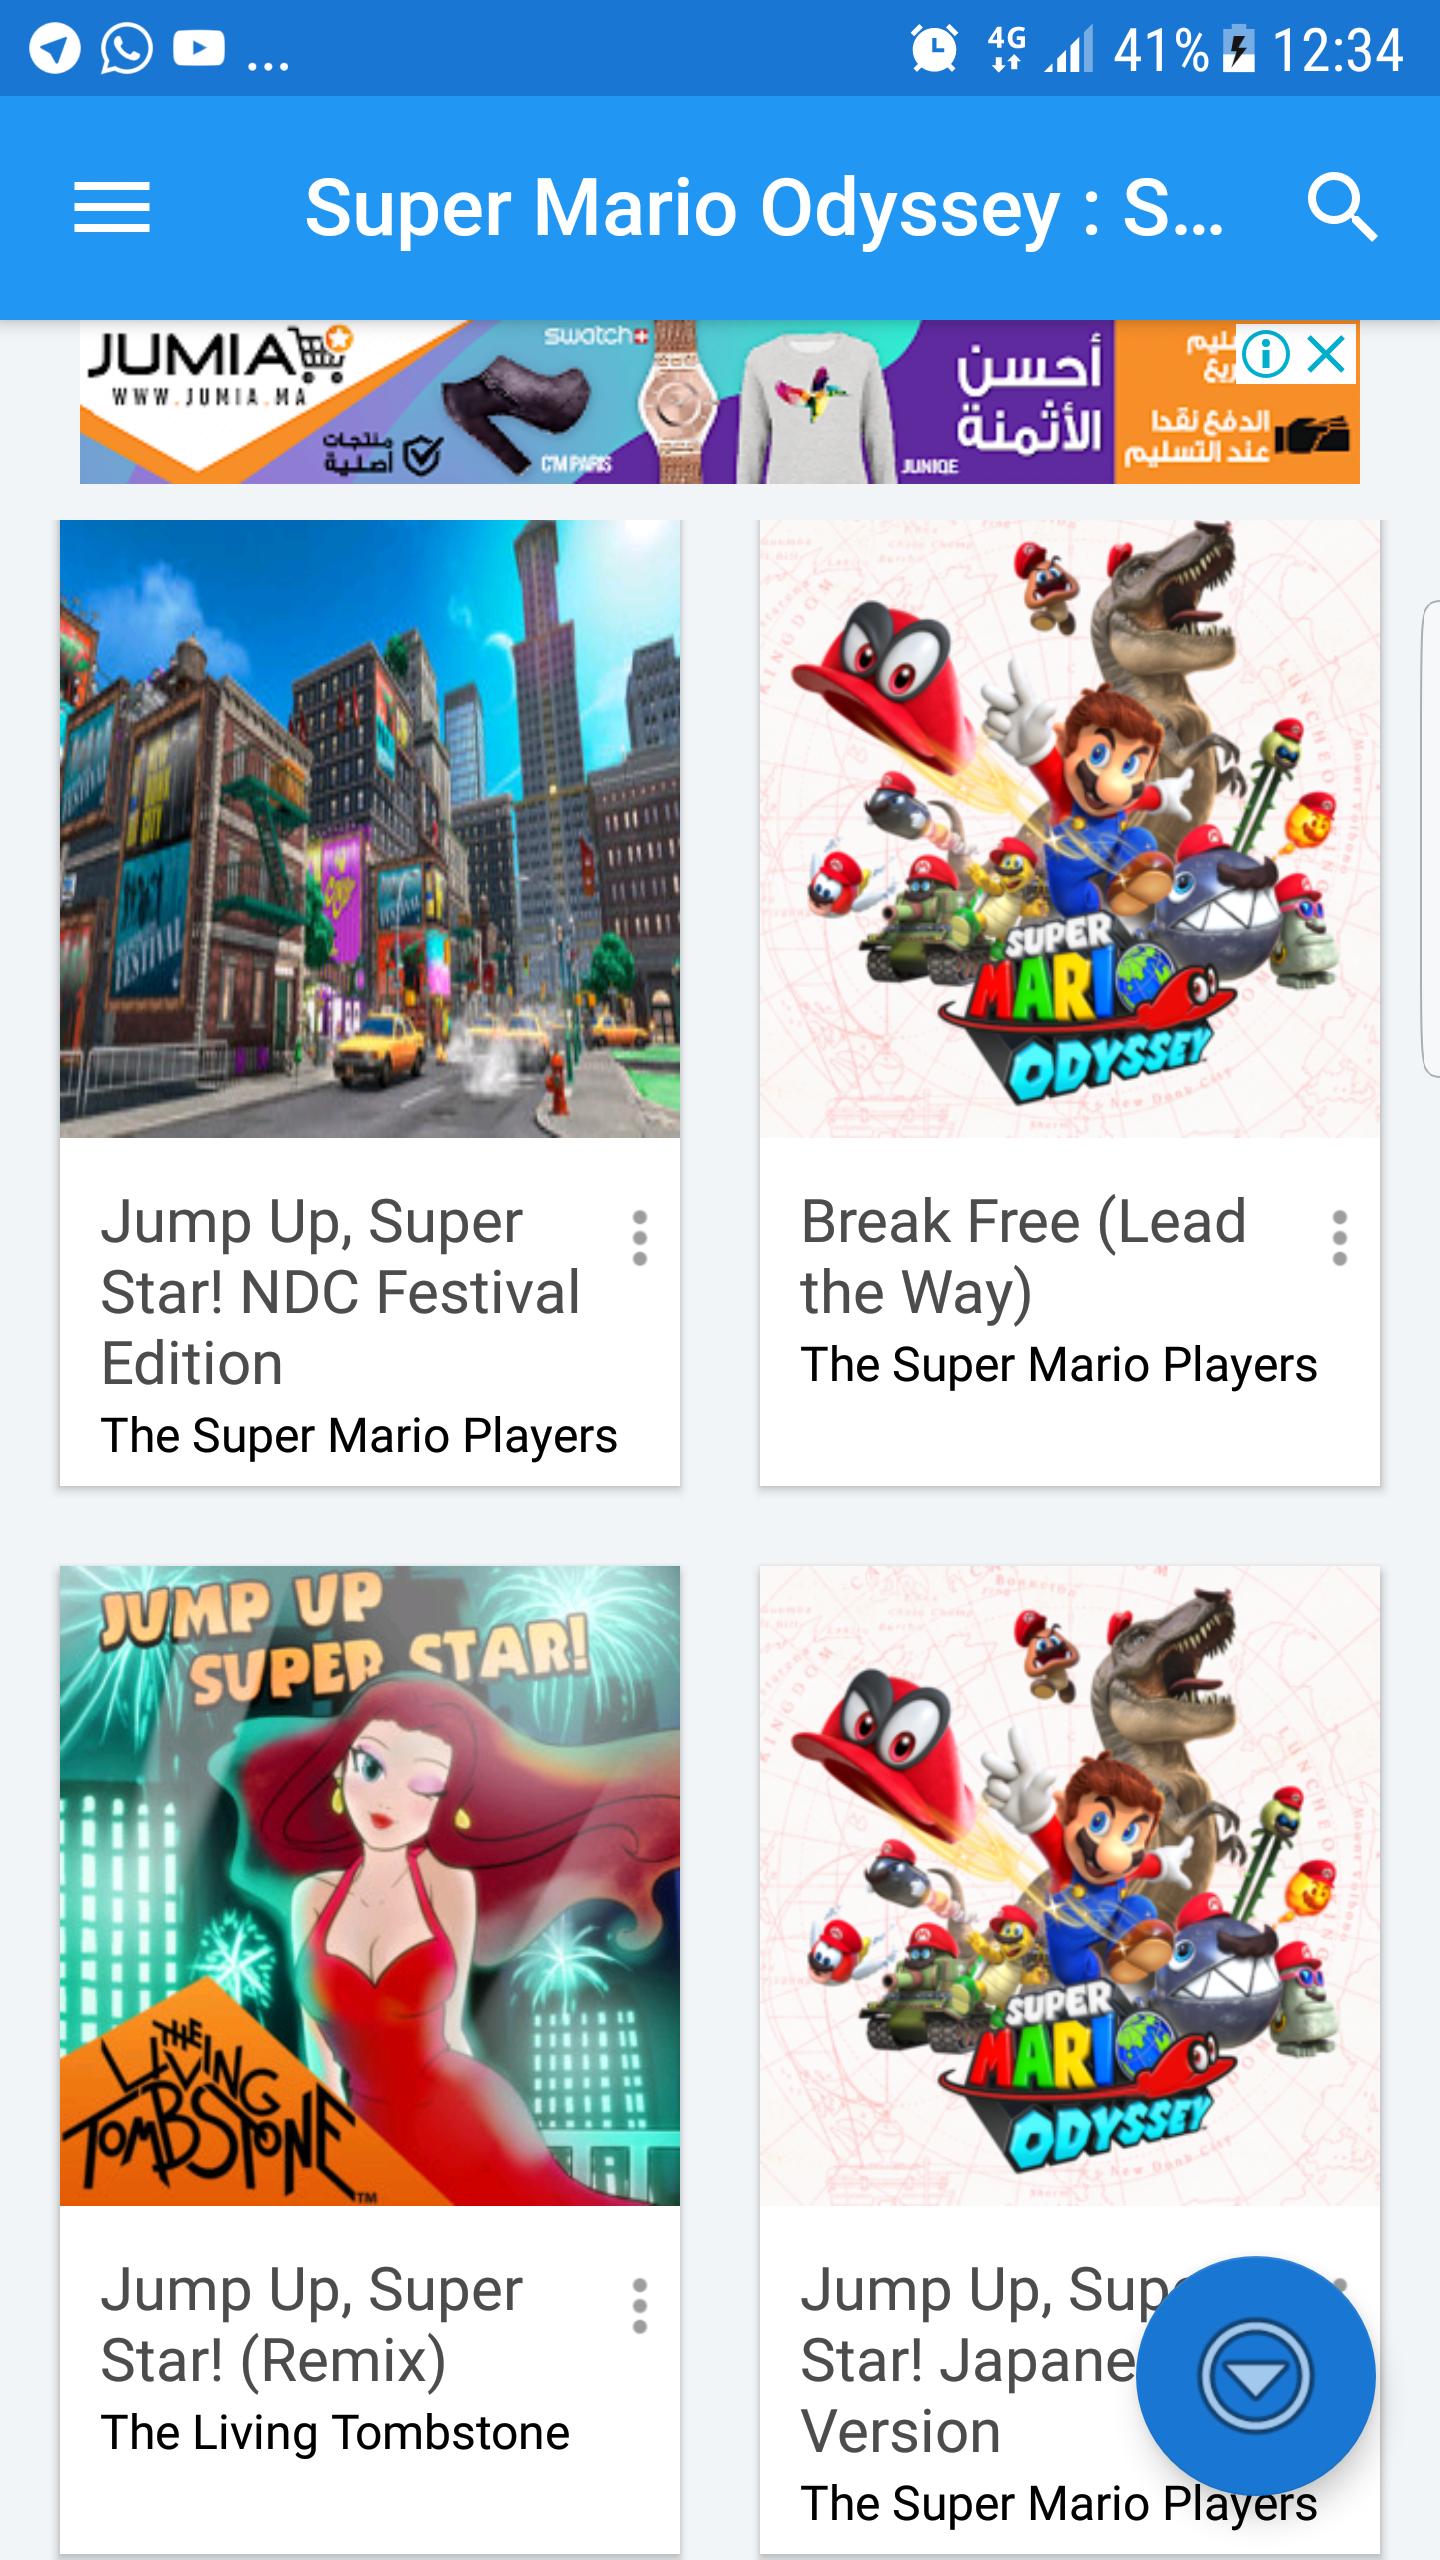 All Songs And Lyrics For Mario Odyssey For Android Apk Download - super mario odyssey 2 theme song roblox id